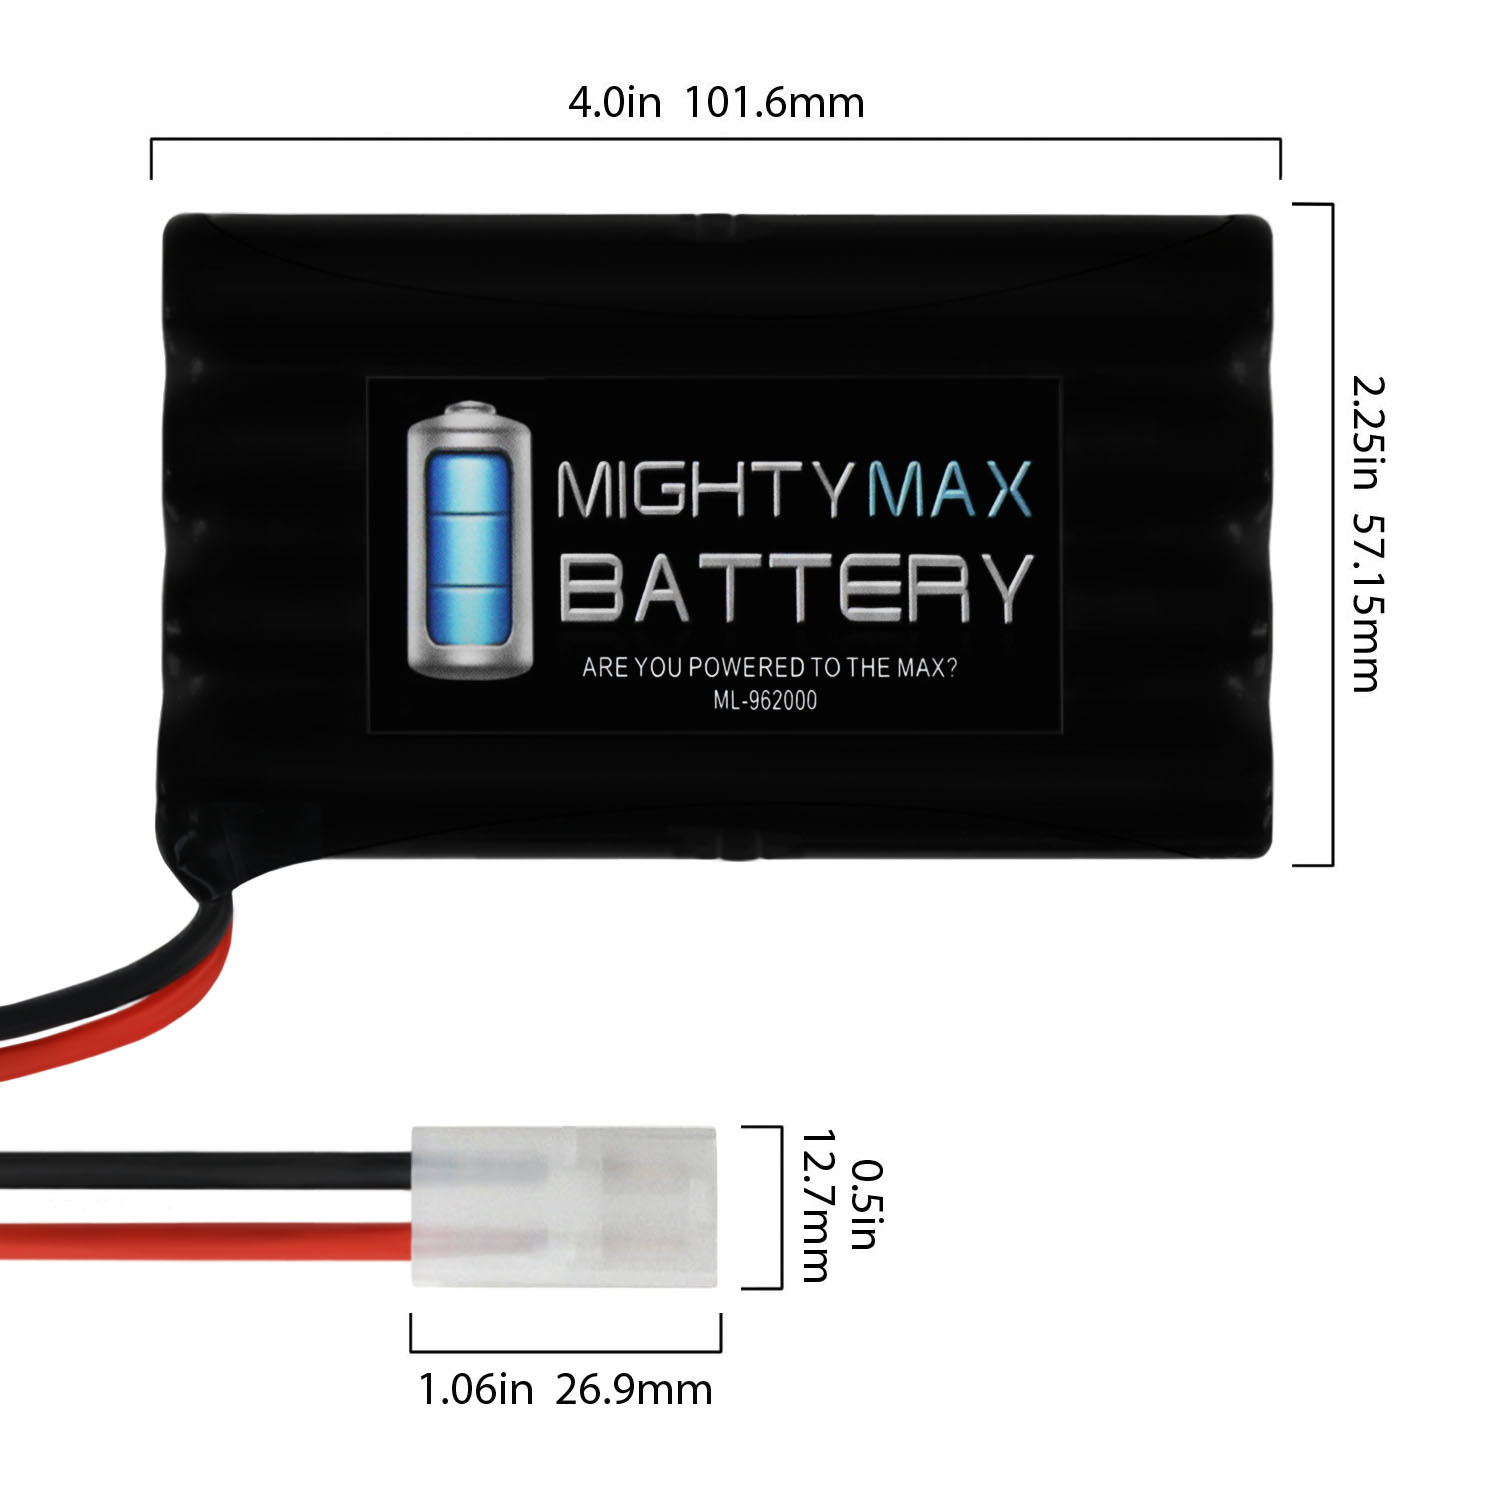  Mighty Max Battery 9.6V 2000mAh Nunchuck Replacement